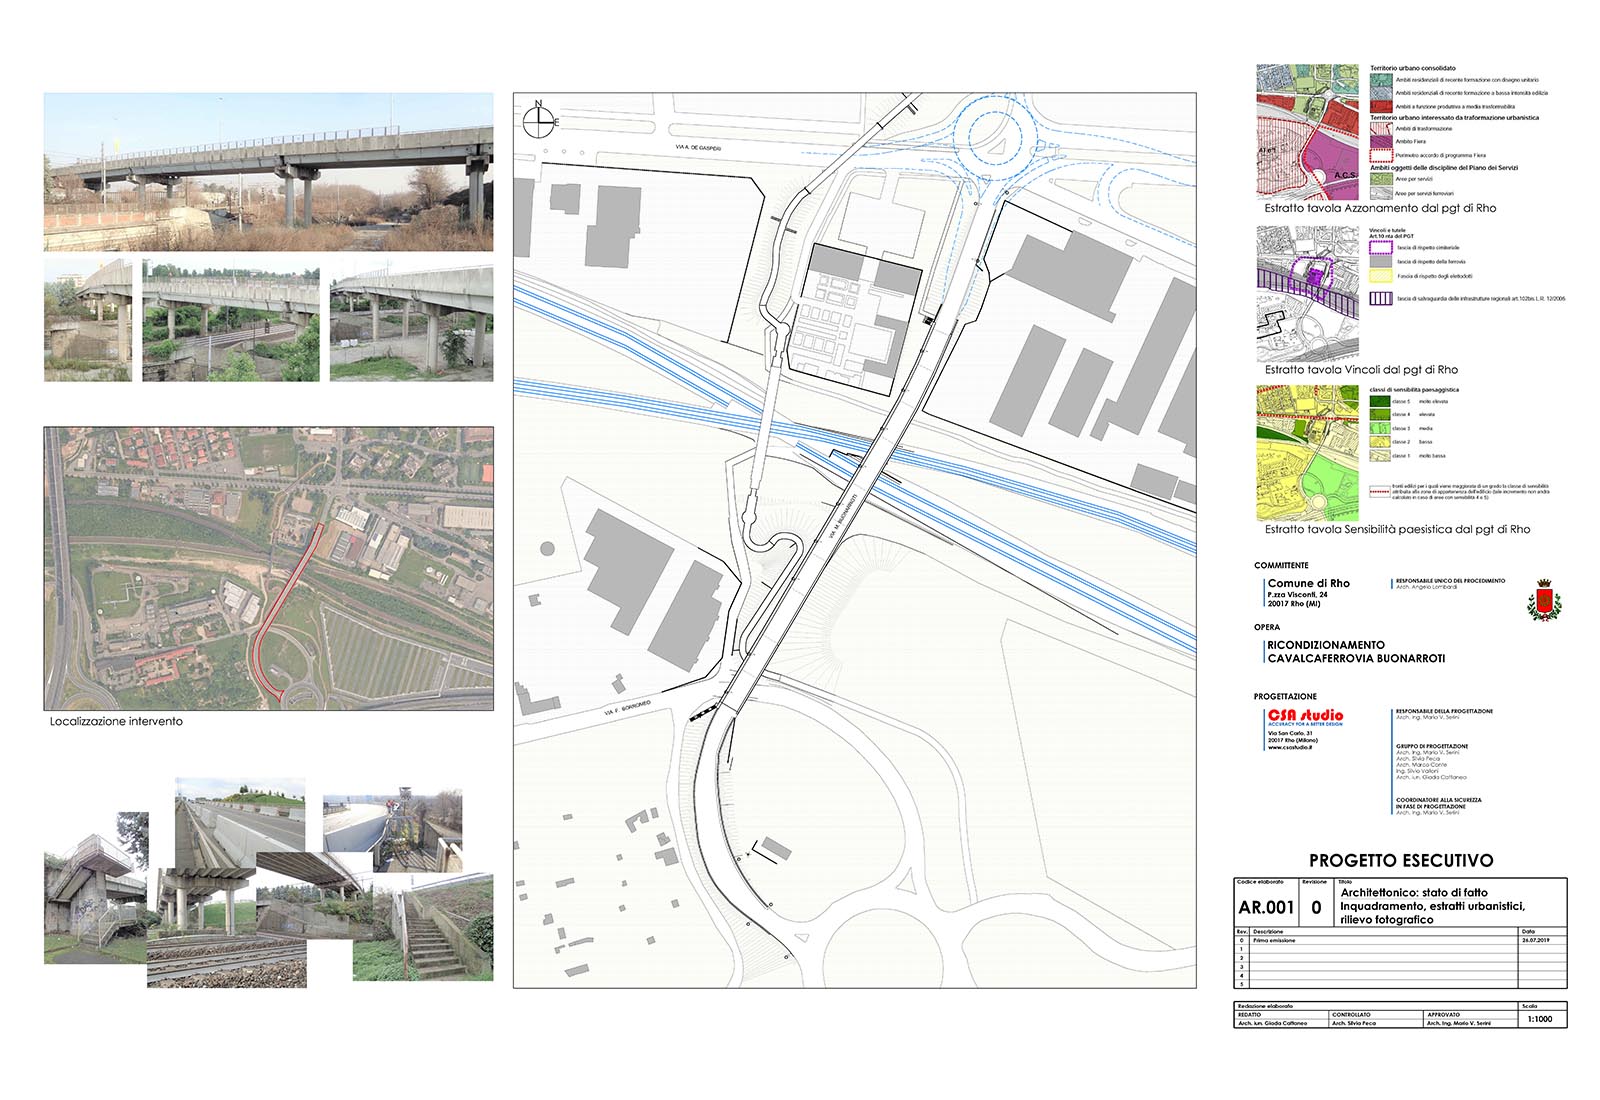 Railroad overpass renovation in Rho - Interventions plan